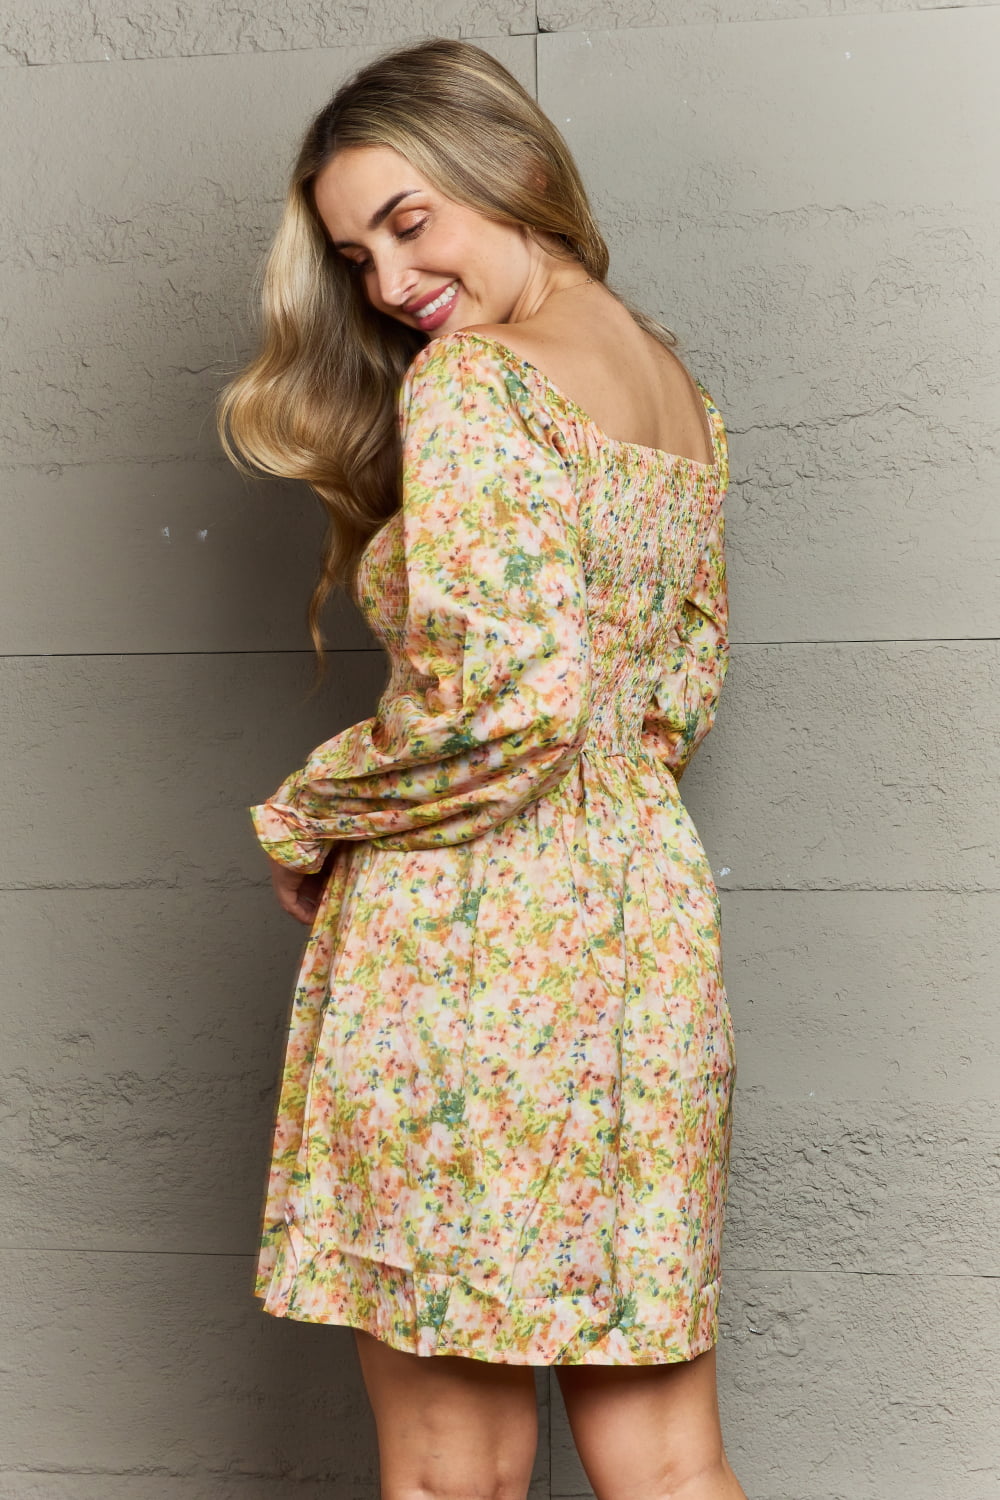 Elegant Floral Square Neck Dress: Perfect for Summer Beach Weddings and Party Attendees